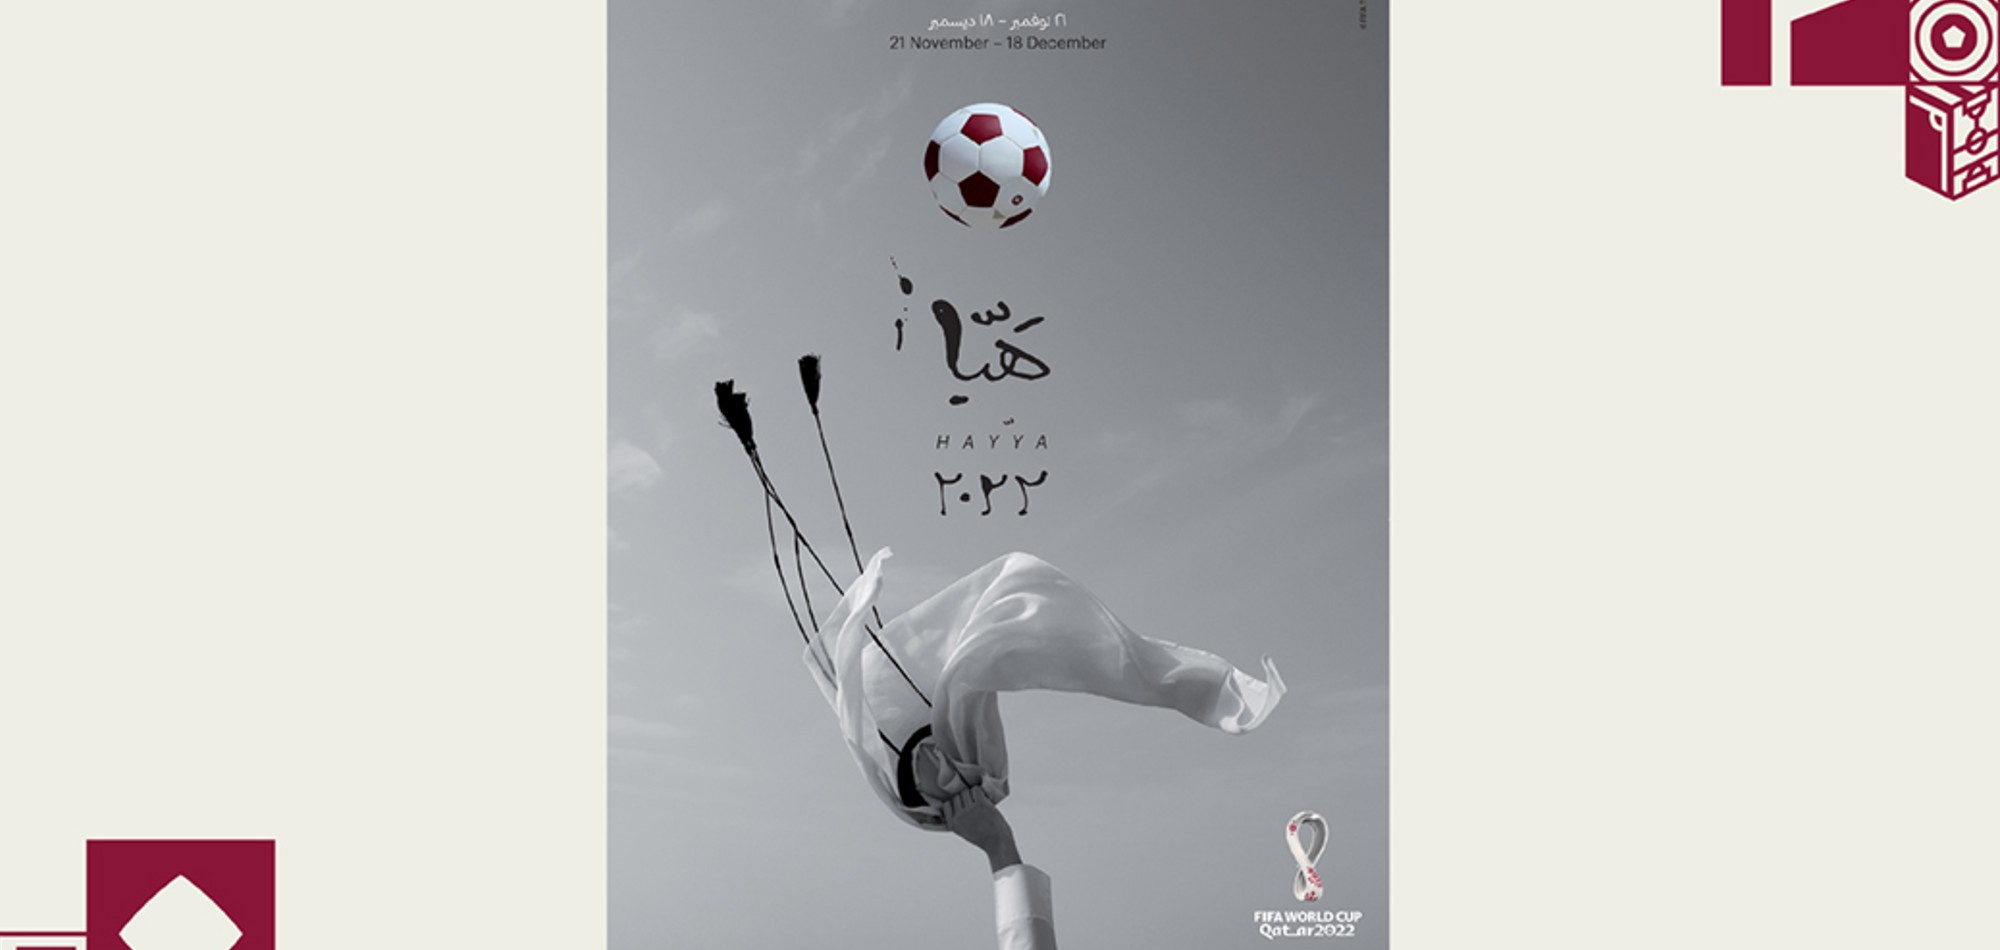 Qatari female artist Bouthayna Al Muftah unveils Official Poster for FIFA World Cup 2022™